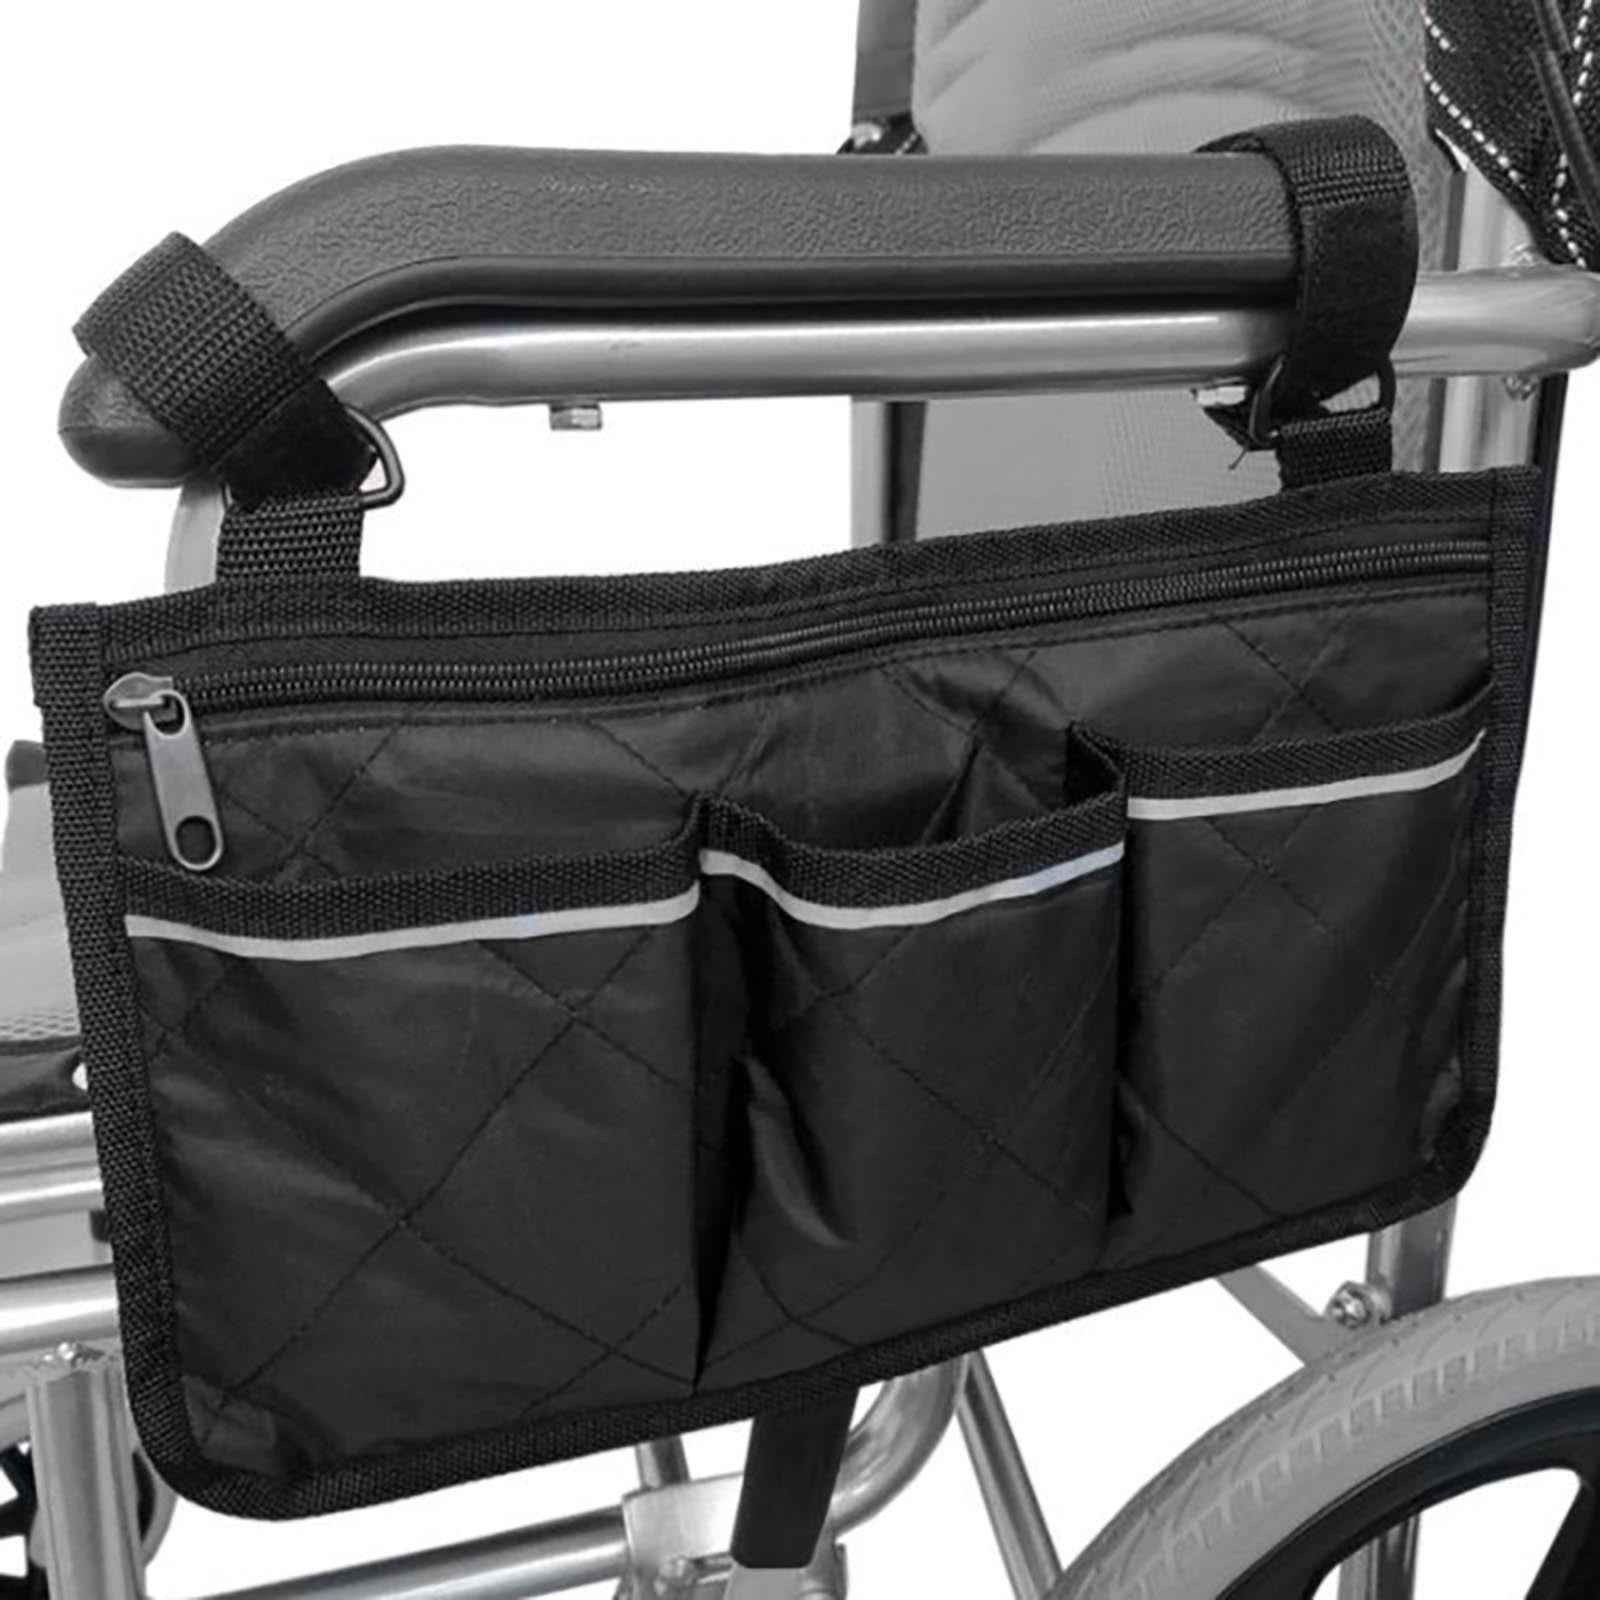 BVMAG Wheelchair Side Bag,Wheelchair Accessories Armrest Storage Organizer  Bag with Cup Holder Pouch Bag for Rollator,Wheelchair Backpack,Seniors